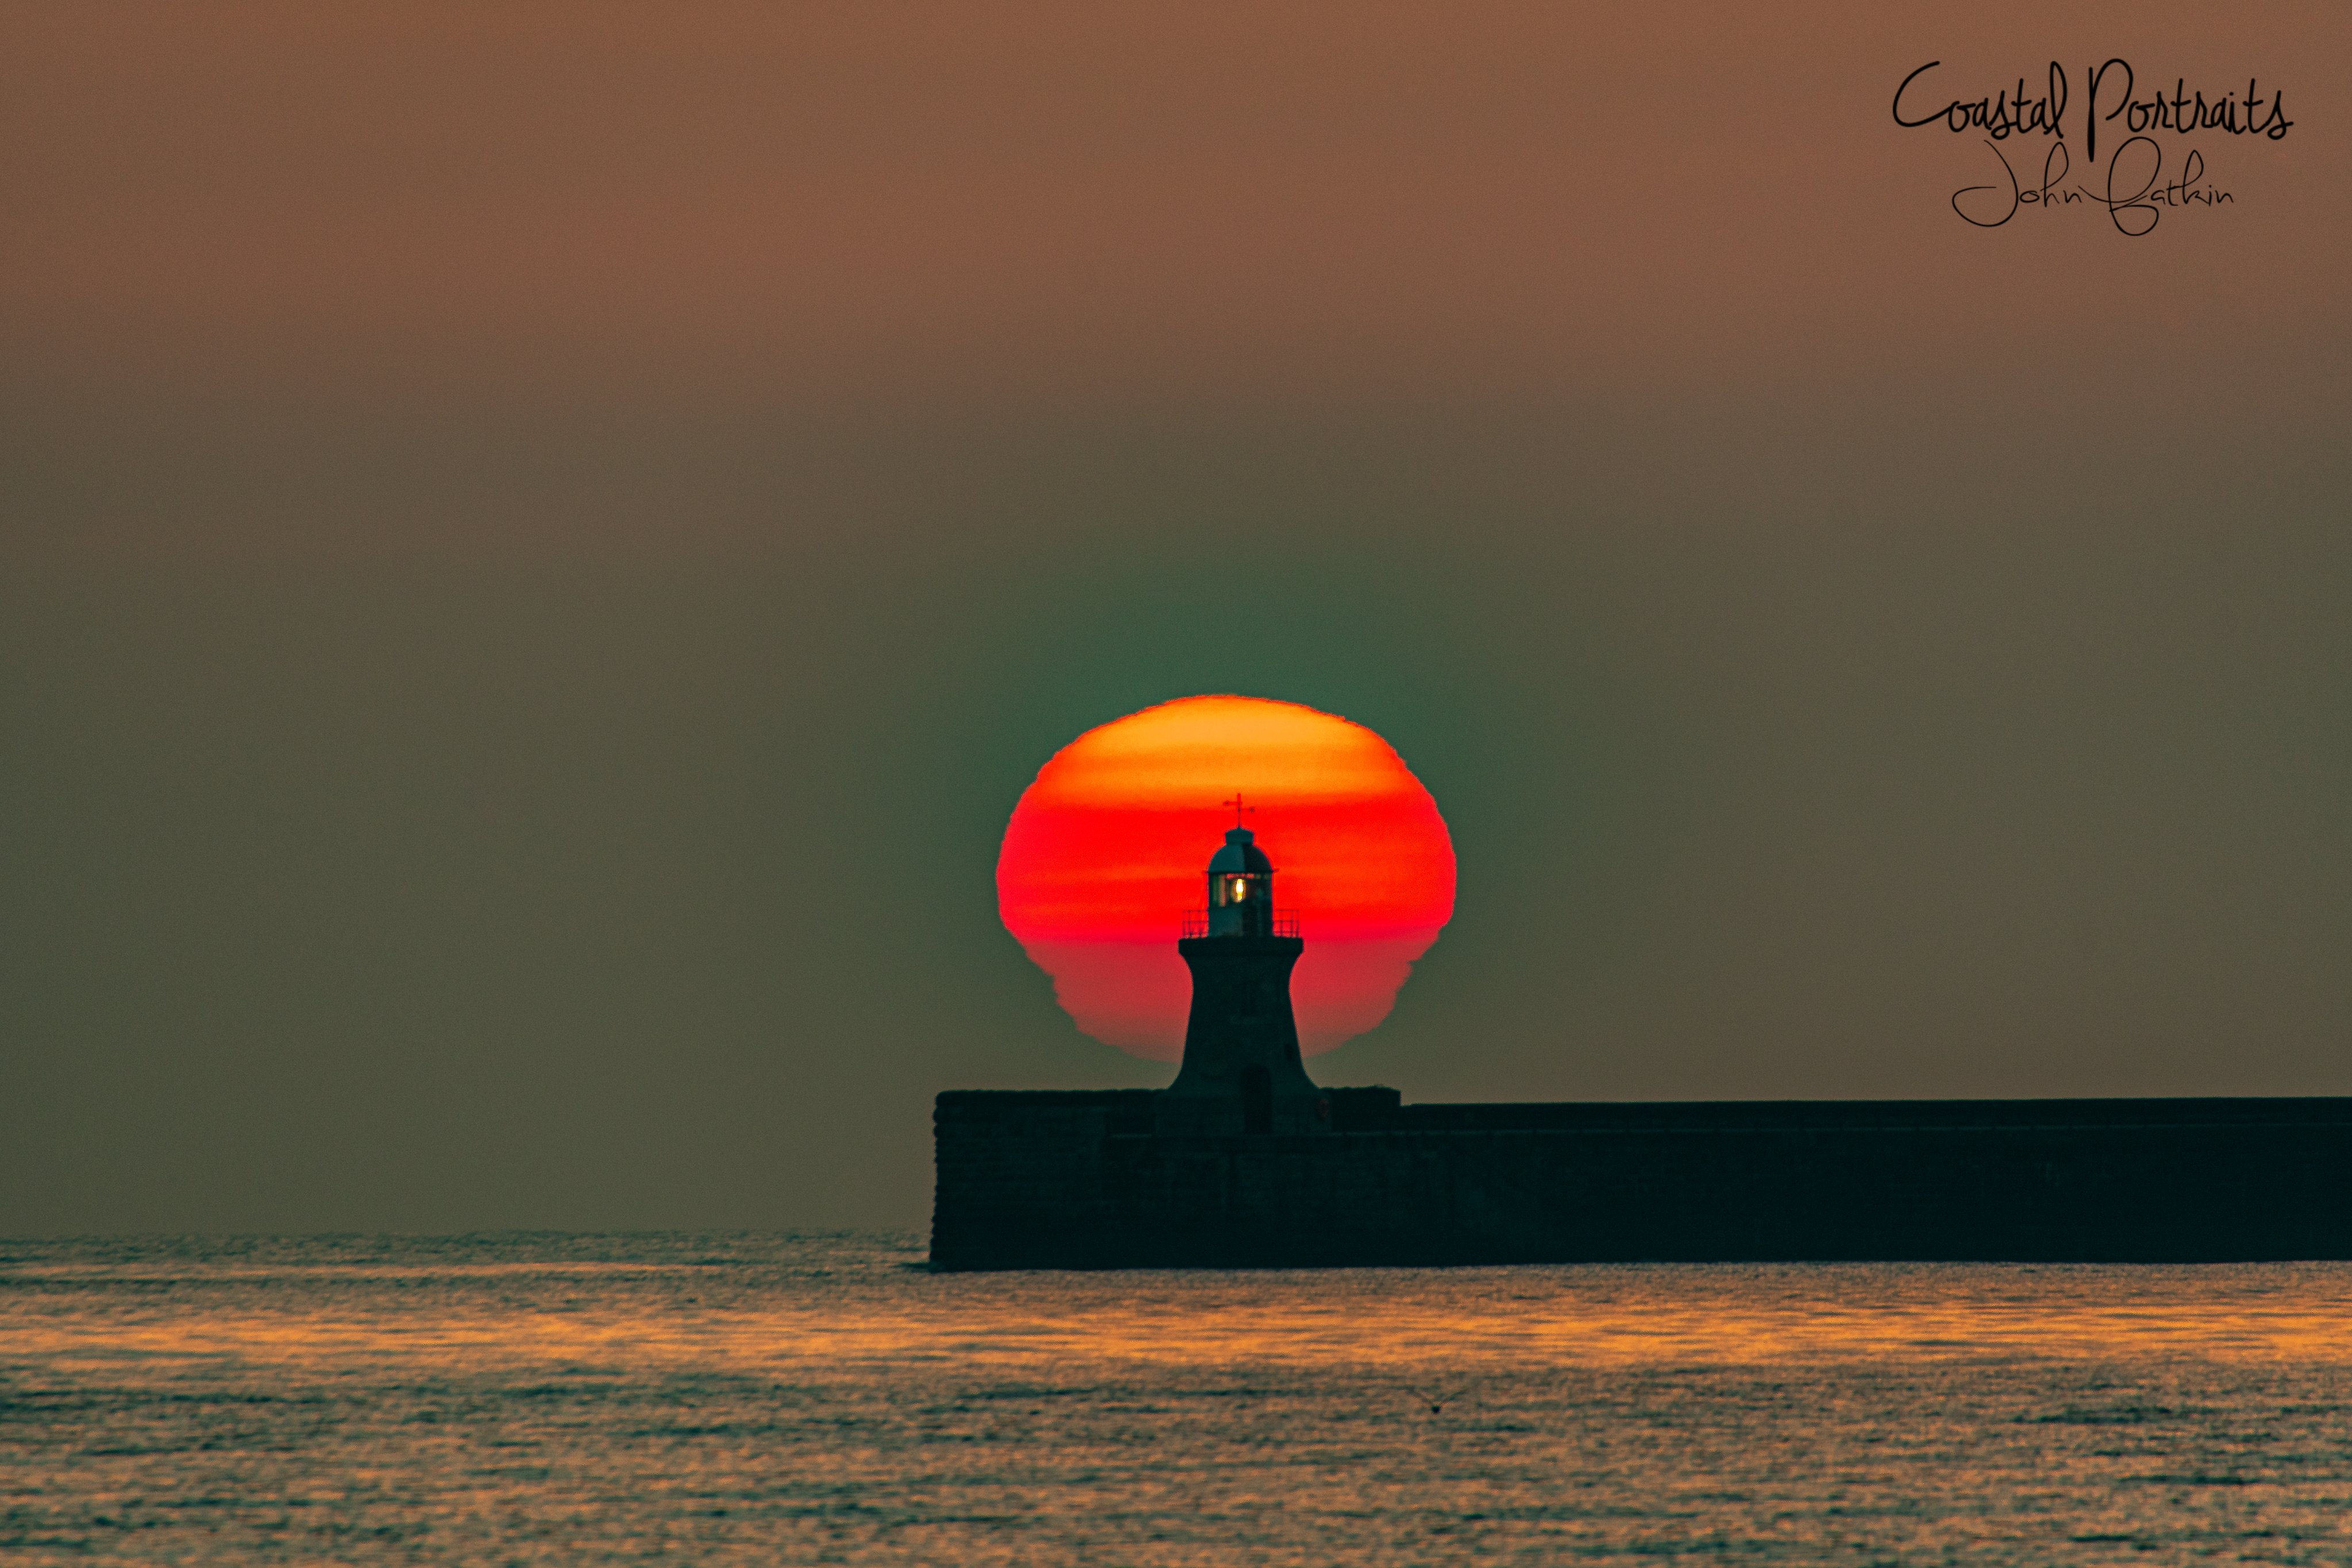 2nd Place Sunrise over the Mouth of the Tyne and South Shields Pier & Lighthouse by Coastal Portraits @johndefatkin